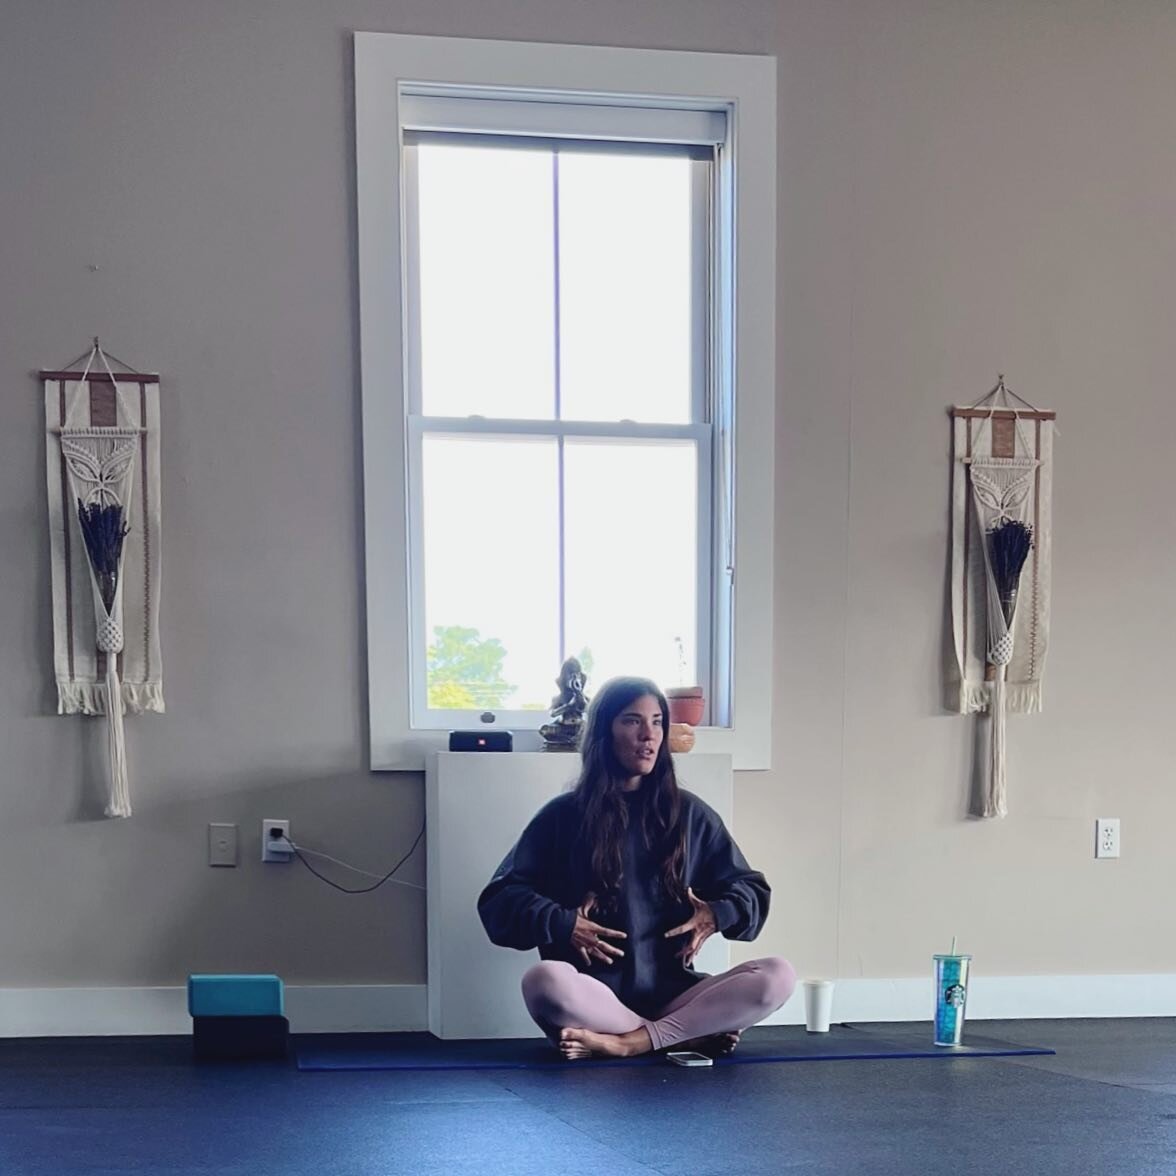 Jai ma 🐅 Hannah channeling some divine light force, assisted by caffeinated beverage. &mdash; @belovedbakasana 

#yogaptown #ptown #yoga #capecod